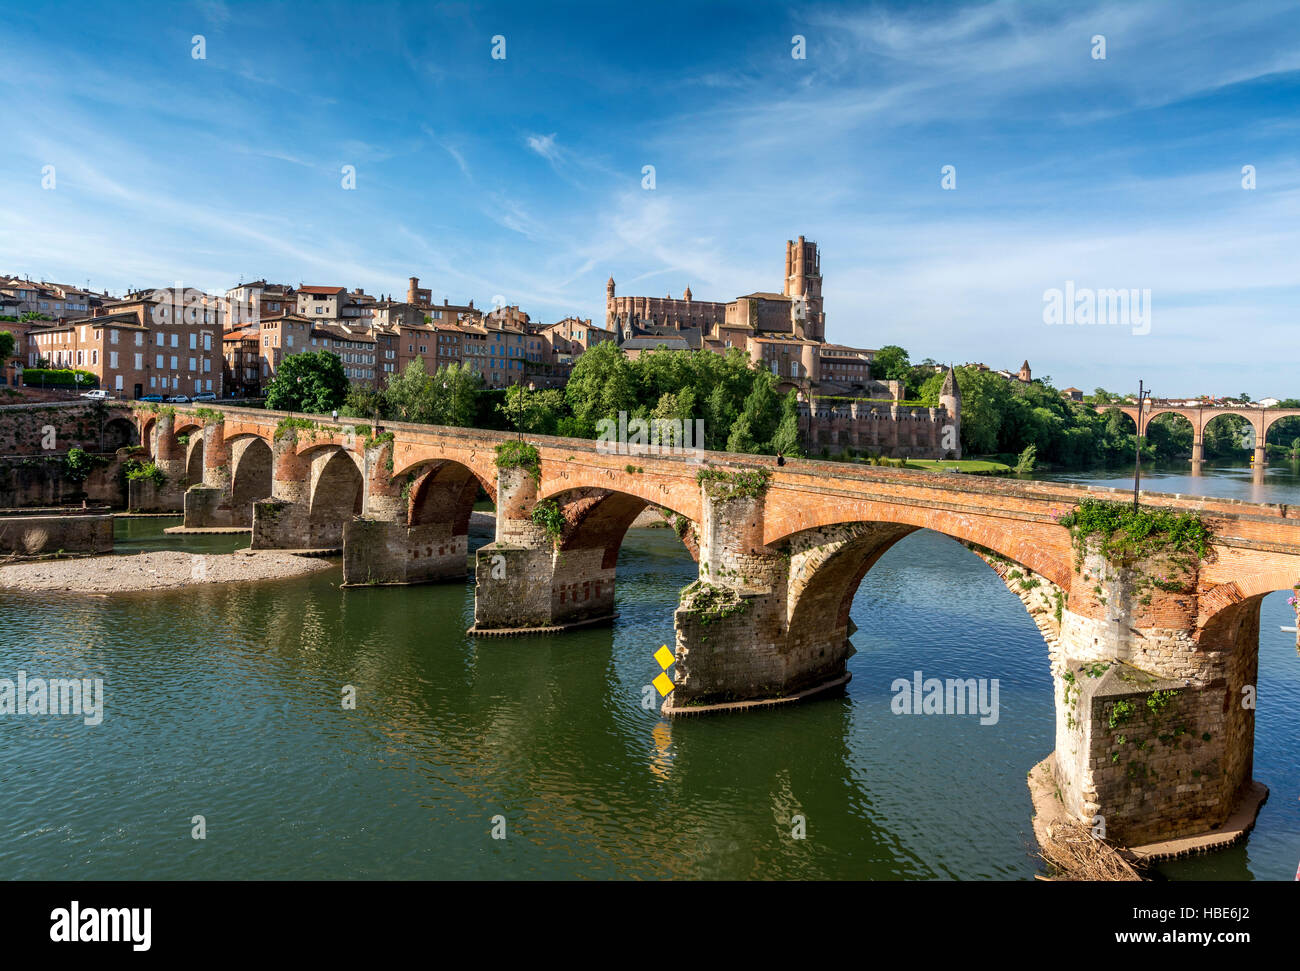 Albi. Old bridge (le pont vieux) and Cathedral of Saint Cecilia, River Tarn, Tarn departement, Occitanie, France, Europe Stock Photo